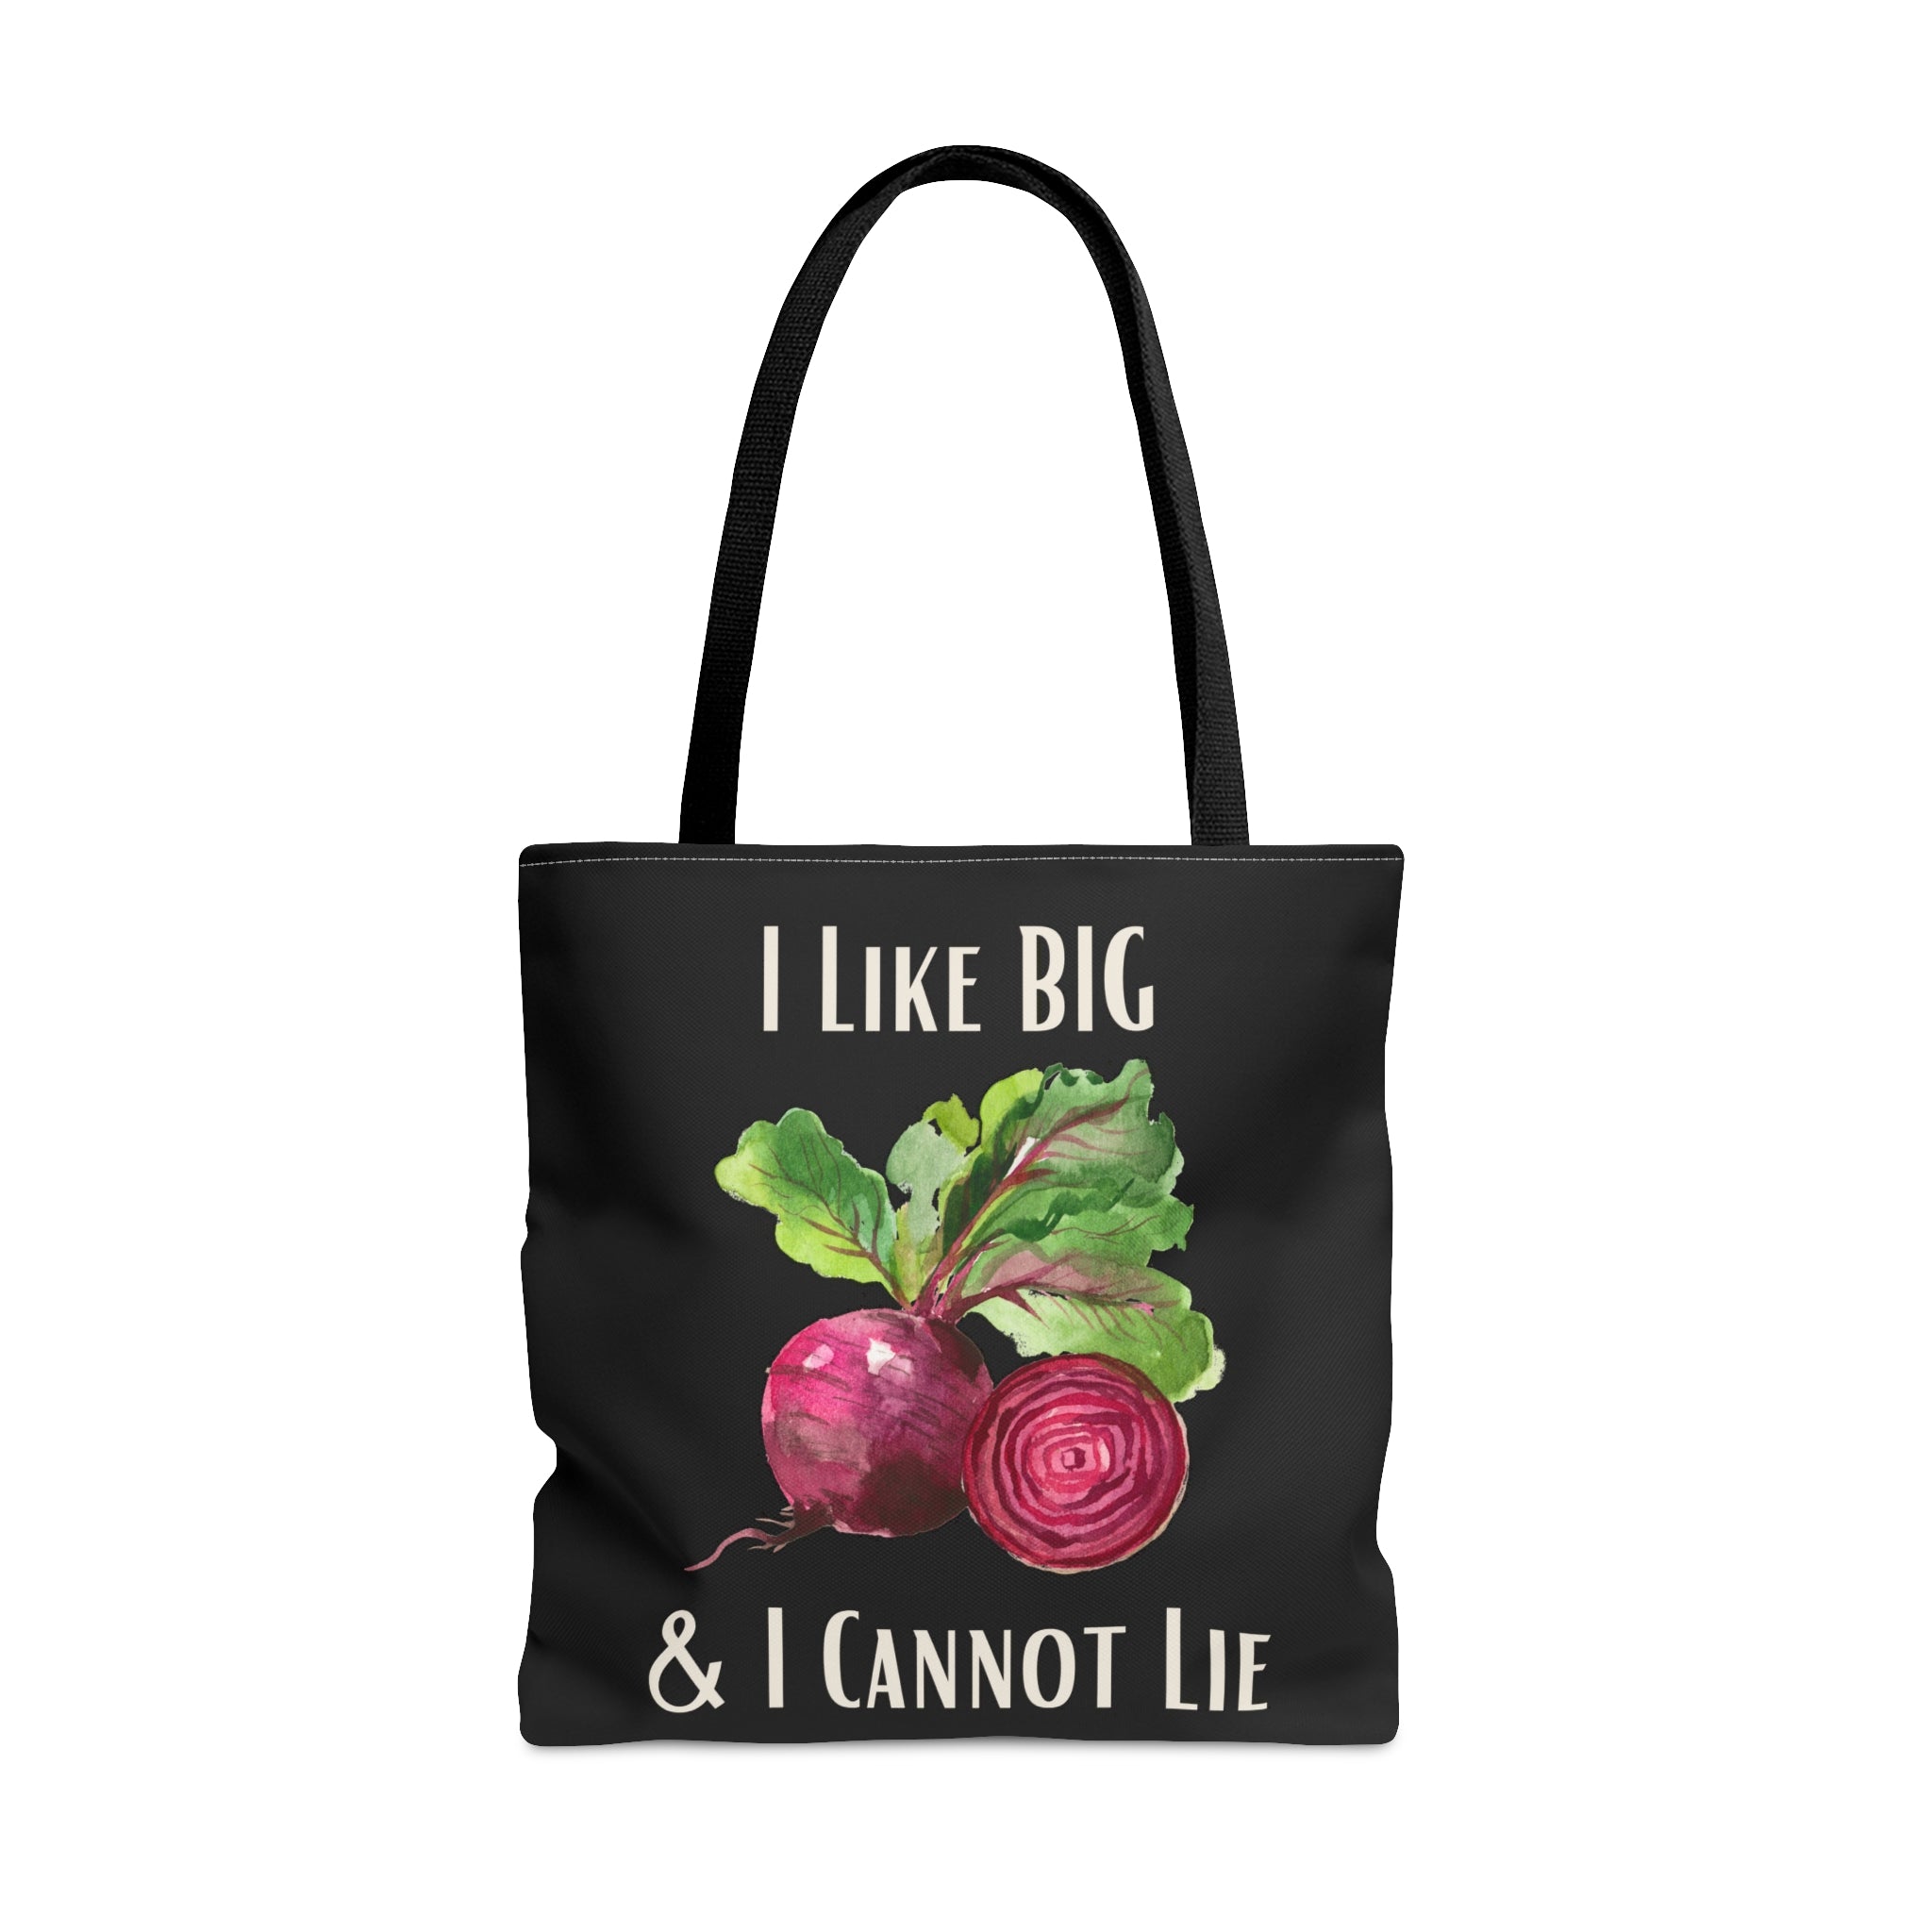 Black tote with beets and words "I Like Big & I Cannot Lie"